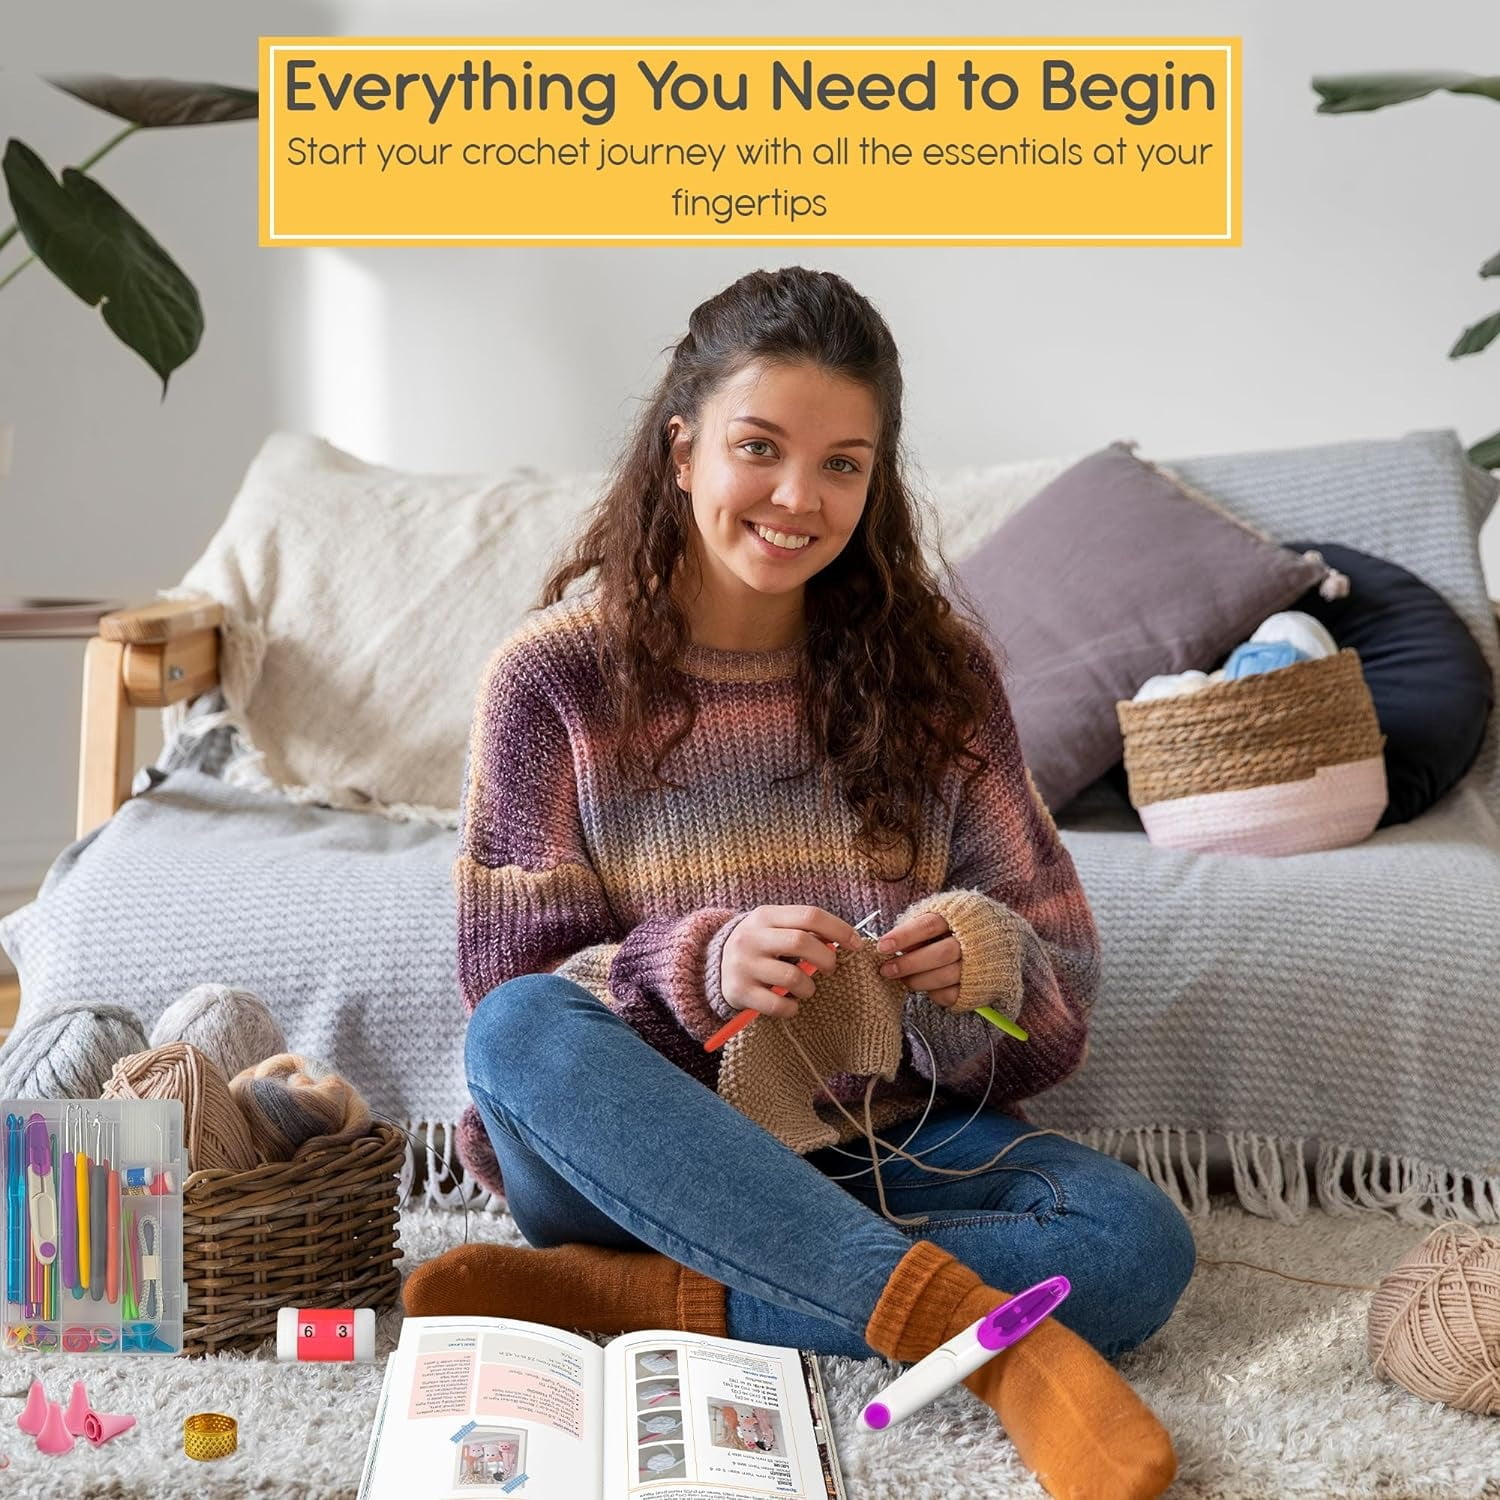 Beginner's Knit & Crochet: Mastering Crafts with Needles & Hooks: From  Socks to Stuffed Animals: Essential Guide for Kids and Adults, Including  Loom Knitting and Crochet Kits by Repprio Co.